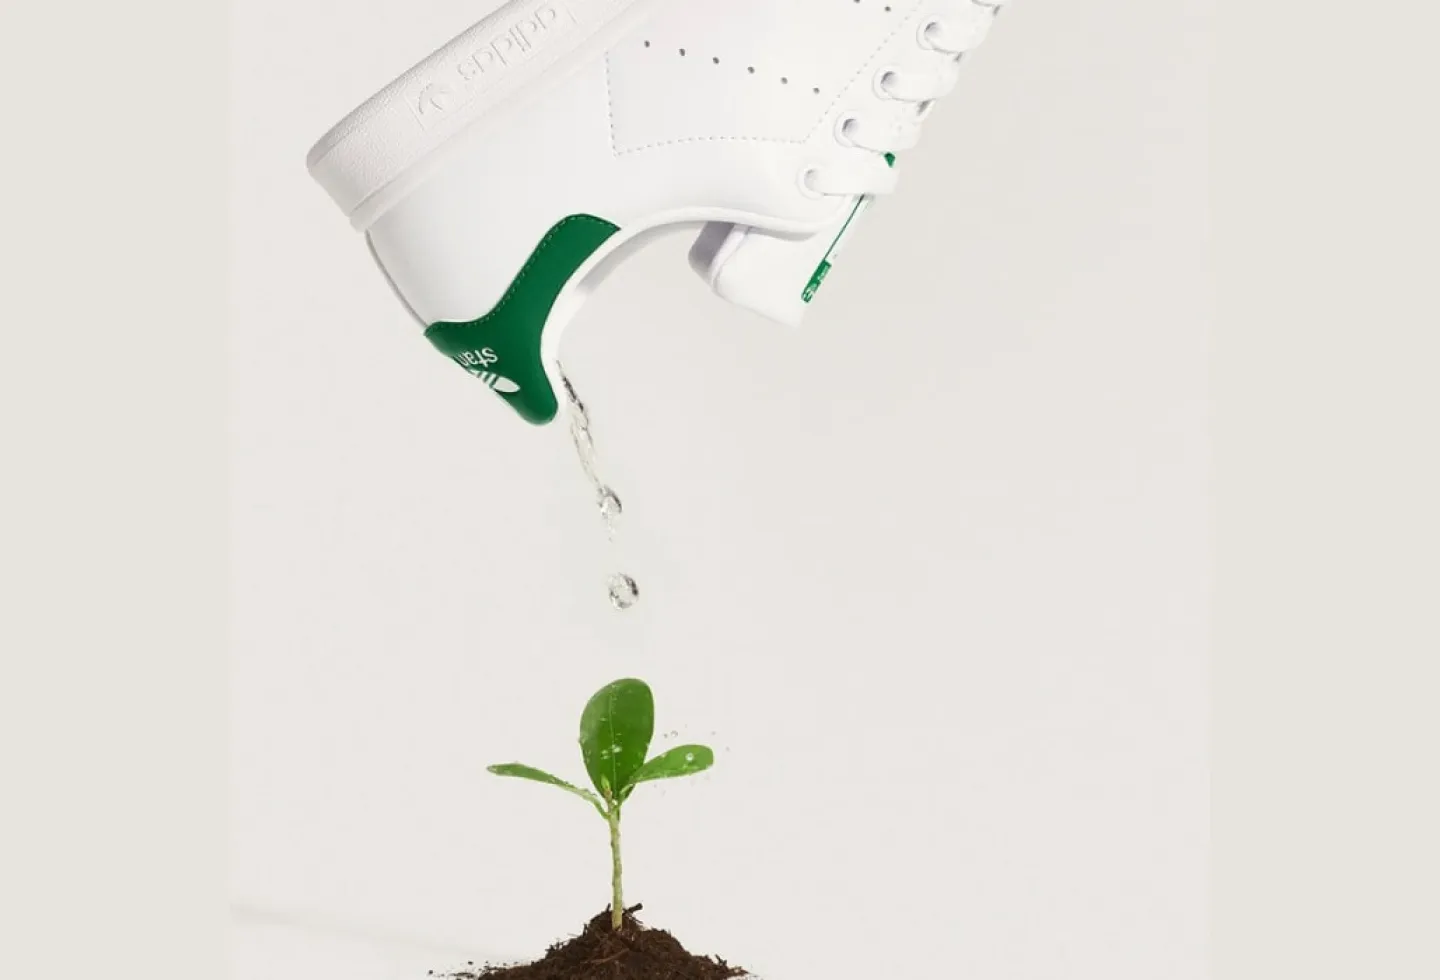 Adidas Sustainability: A Journey Towards Circular and Ethical Sports